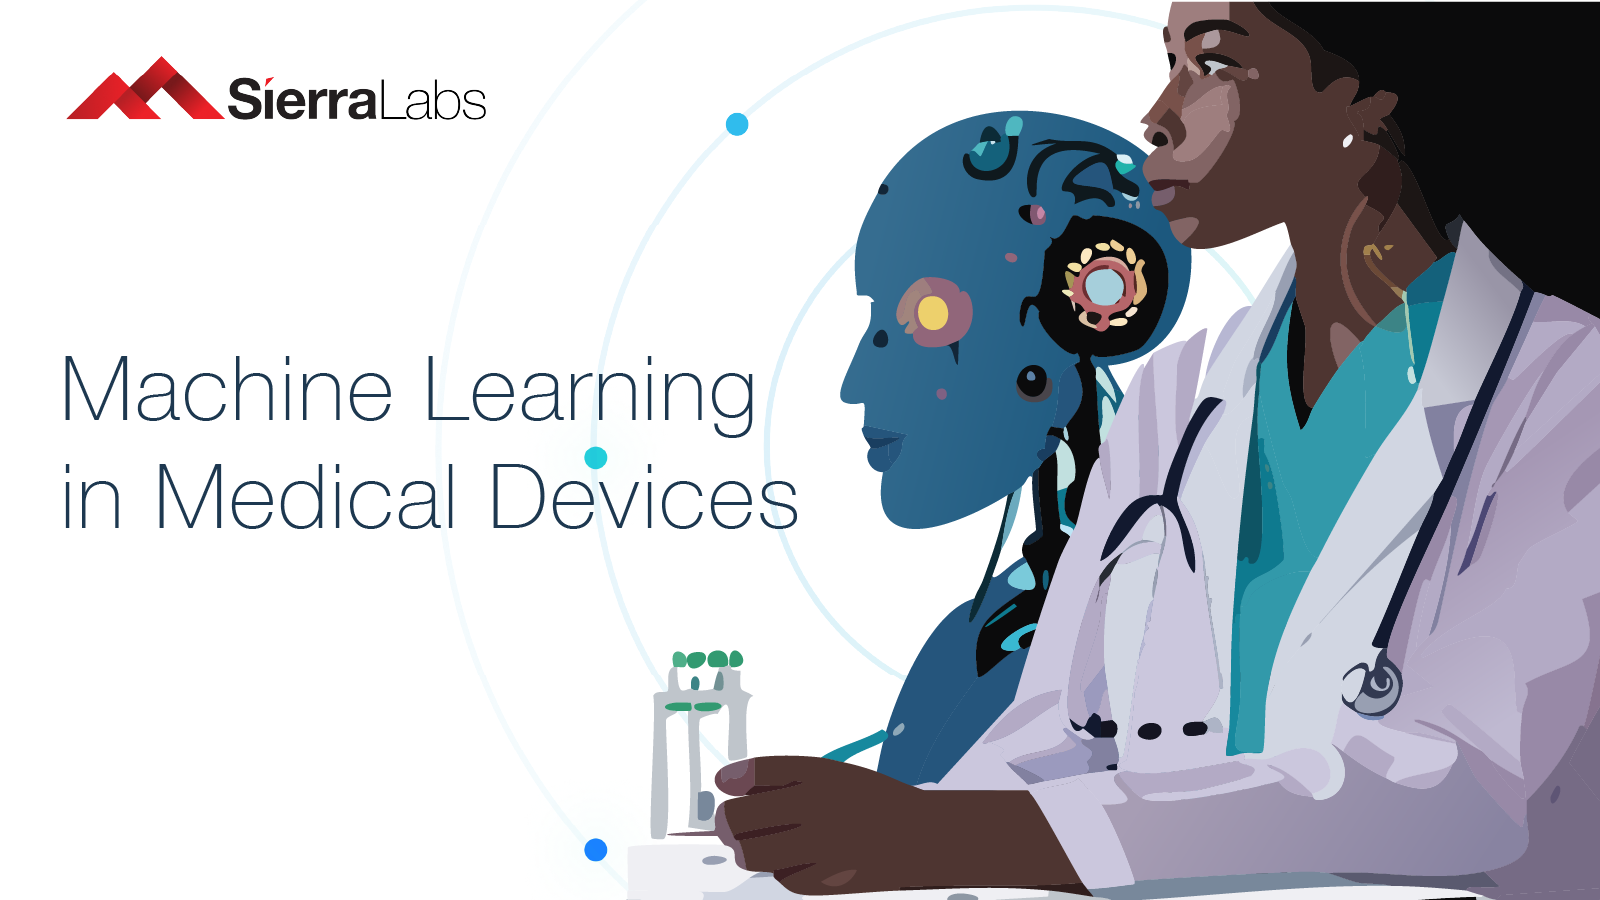 Sierra Labs Machine Learning-Enabled Devices